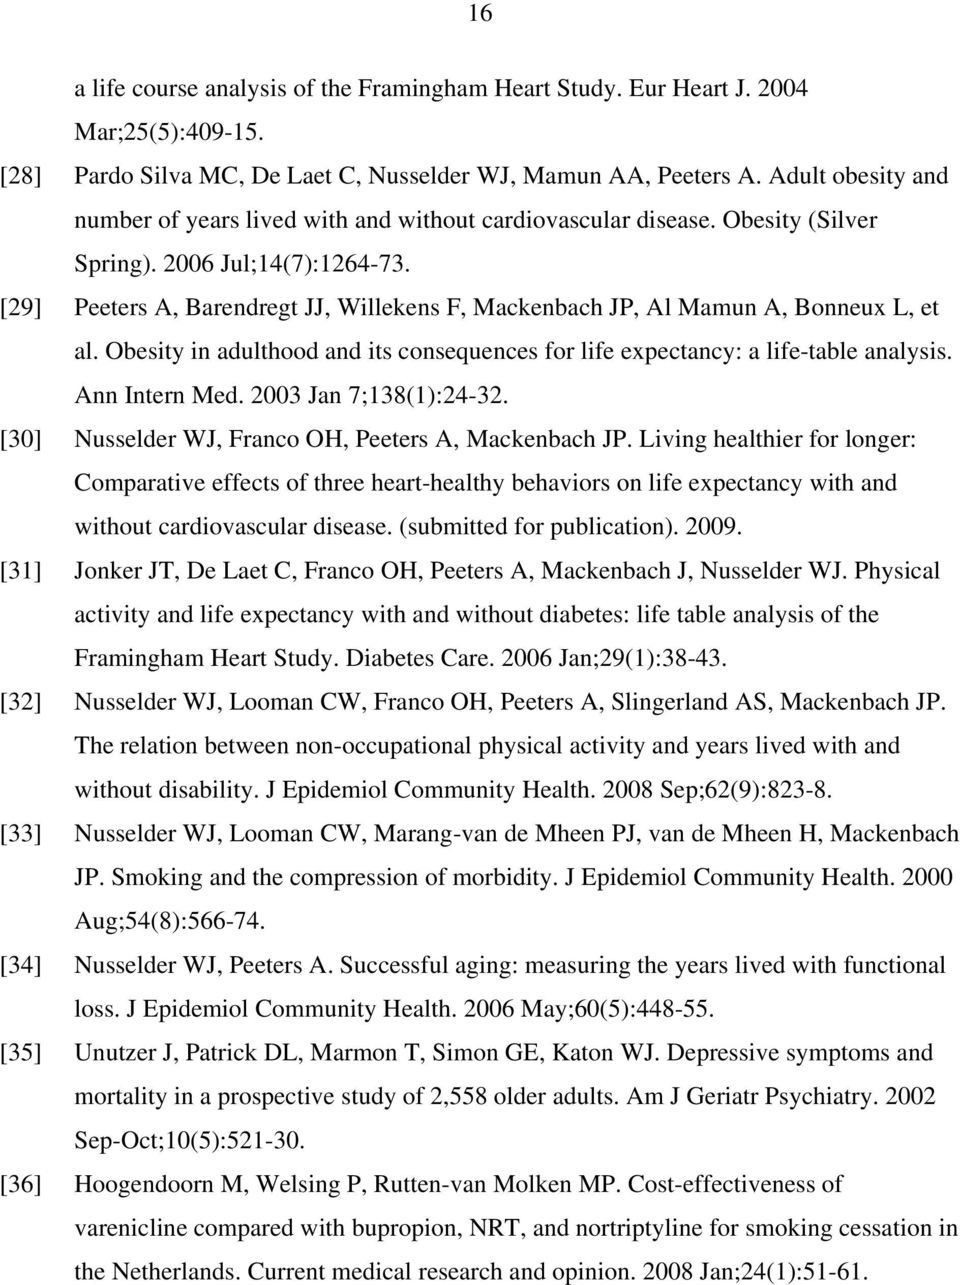 [29] Peeters A, Barendregt JJ, Willekens F, Mackenbach JP, Al Mamun A, Bonneux L, et al. Obesity in adulthood and its consequences for life expectancy: a life-table analysis. Ann Intern Med.